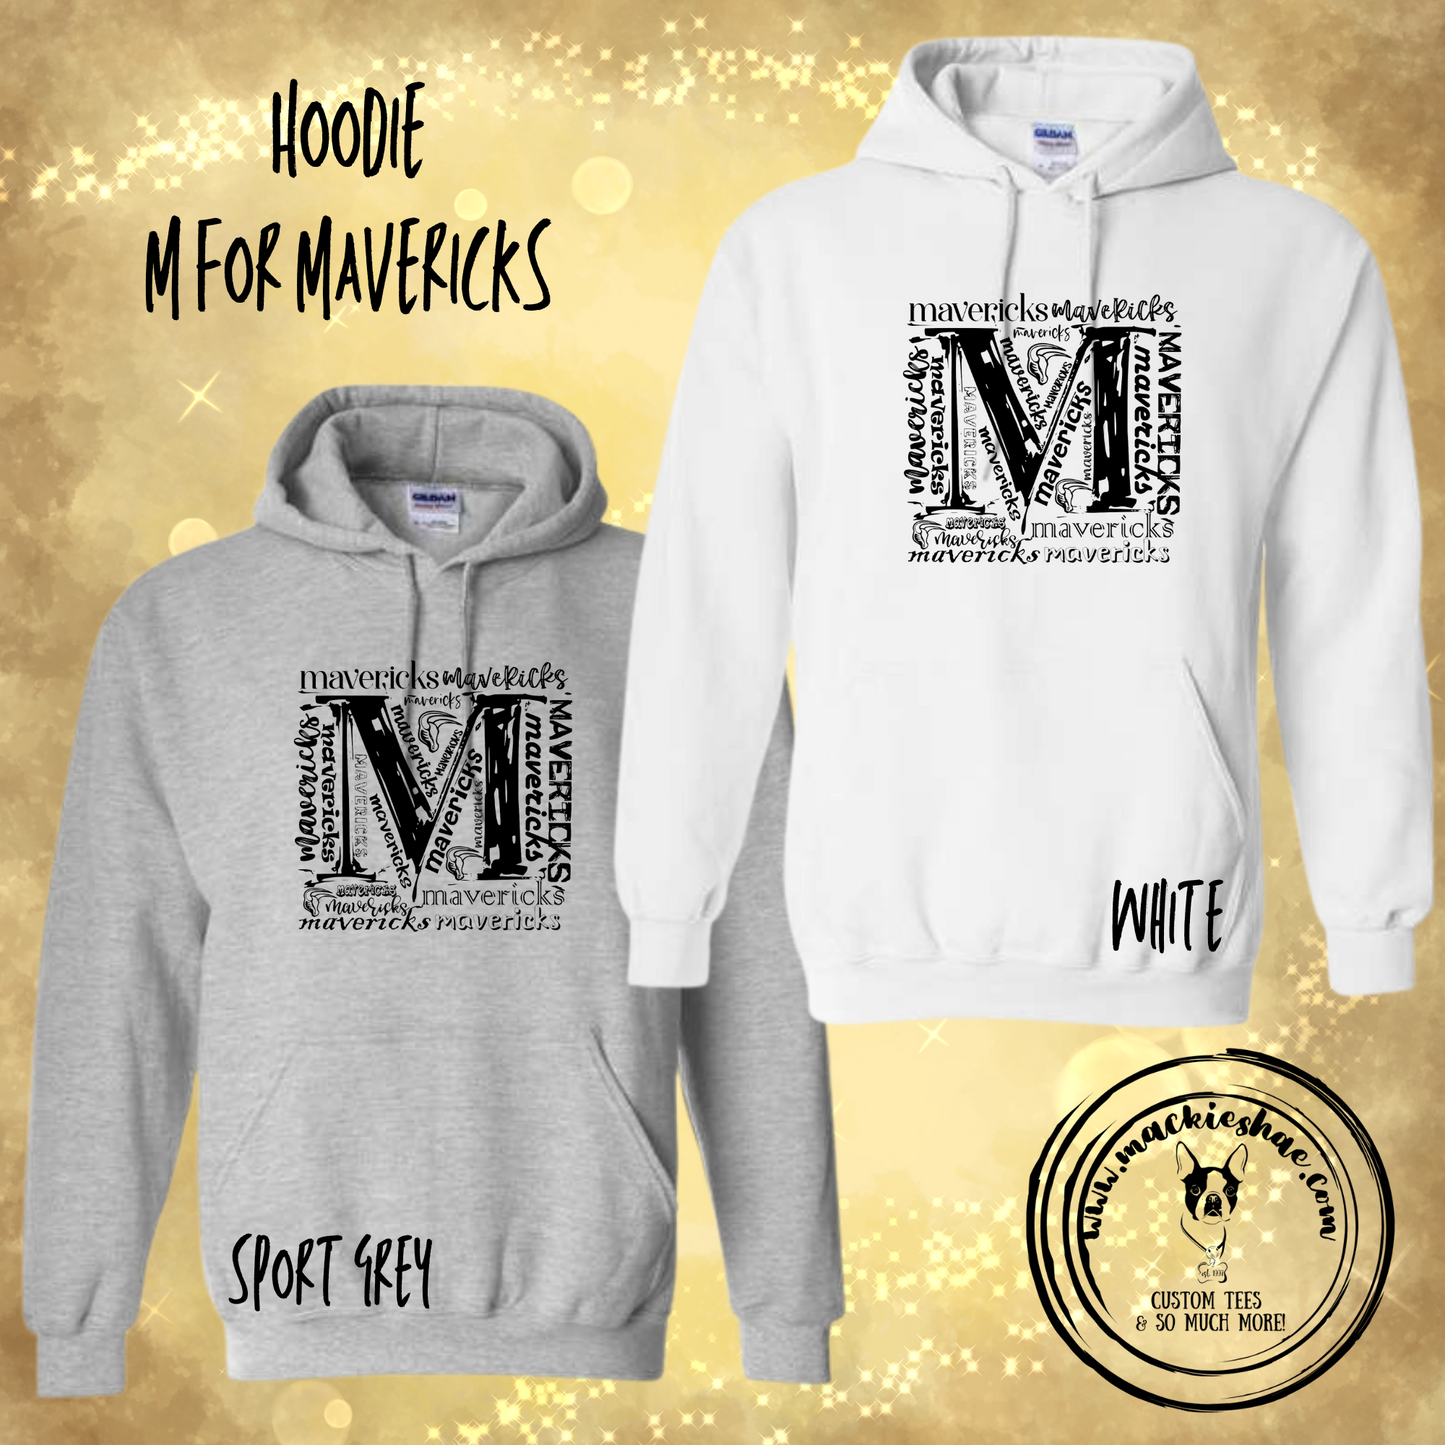 Mavs- M Mavericks Hoodie for Youth and Adults ****ON SALE WHILE SUPPLIES LAST****